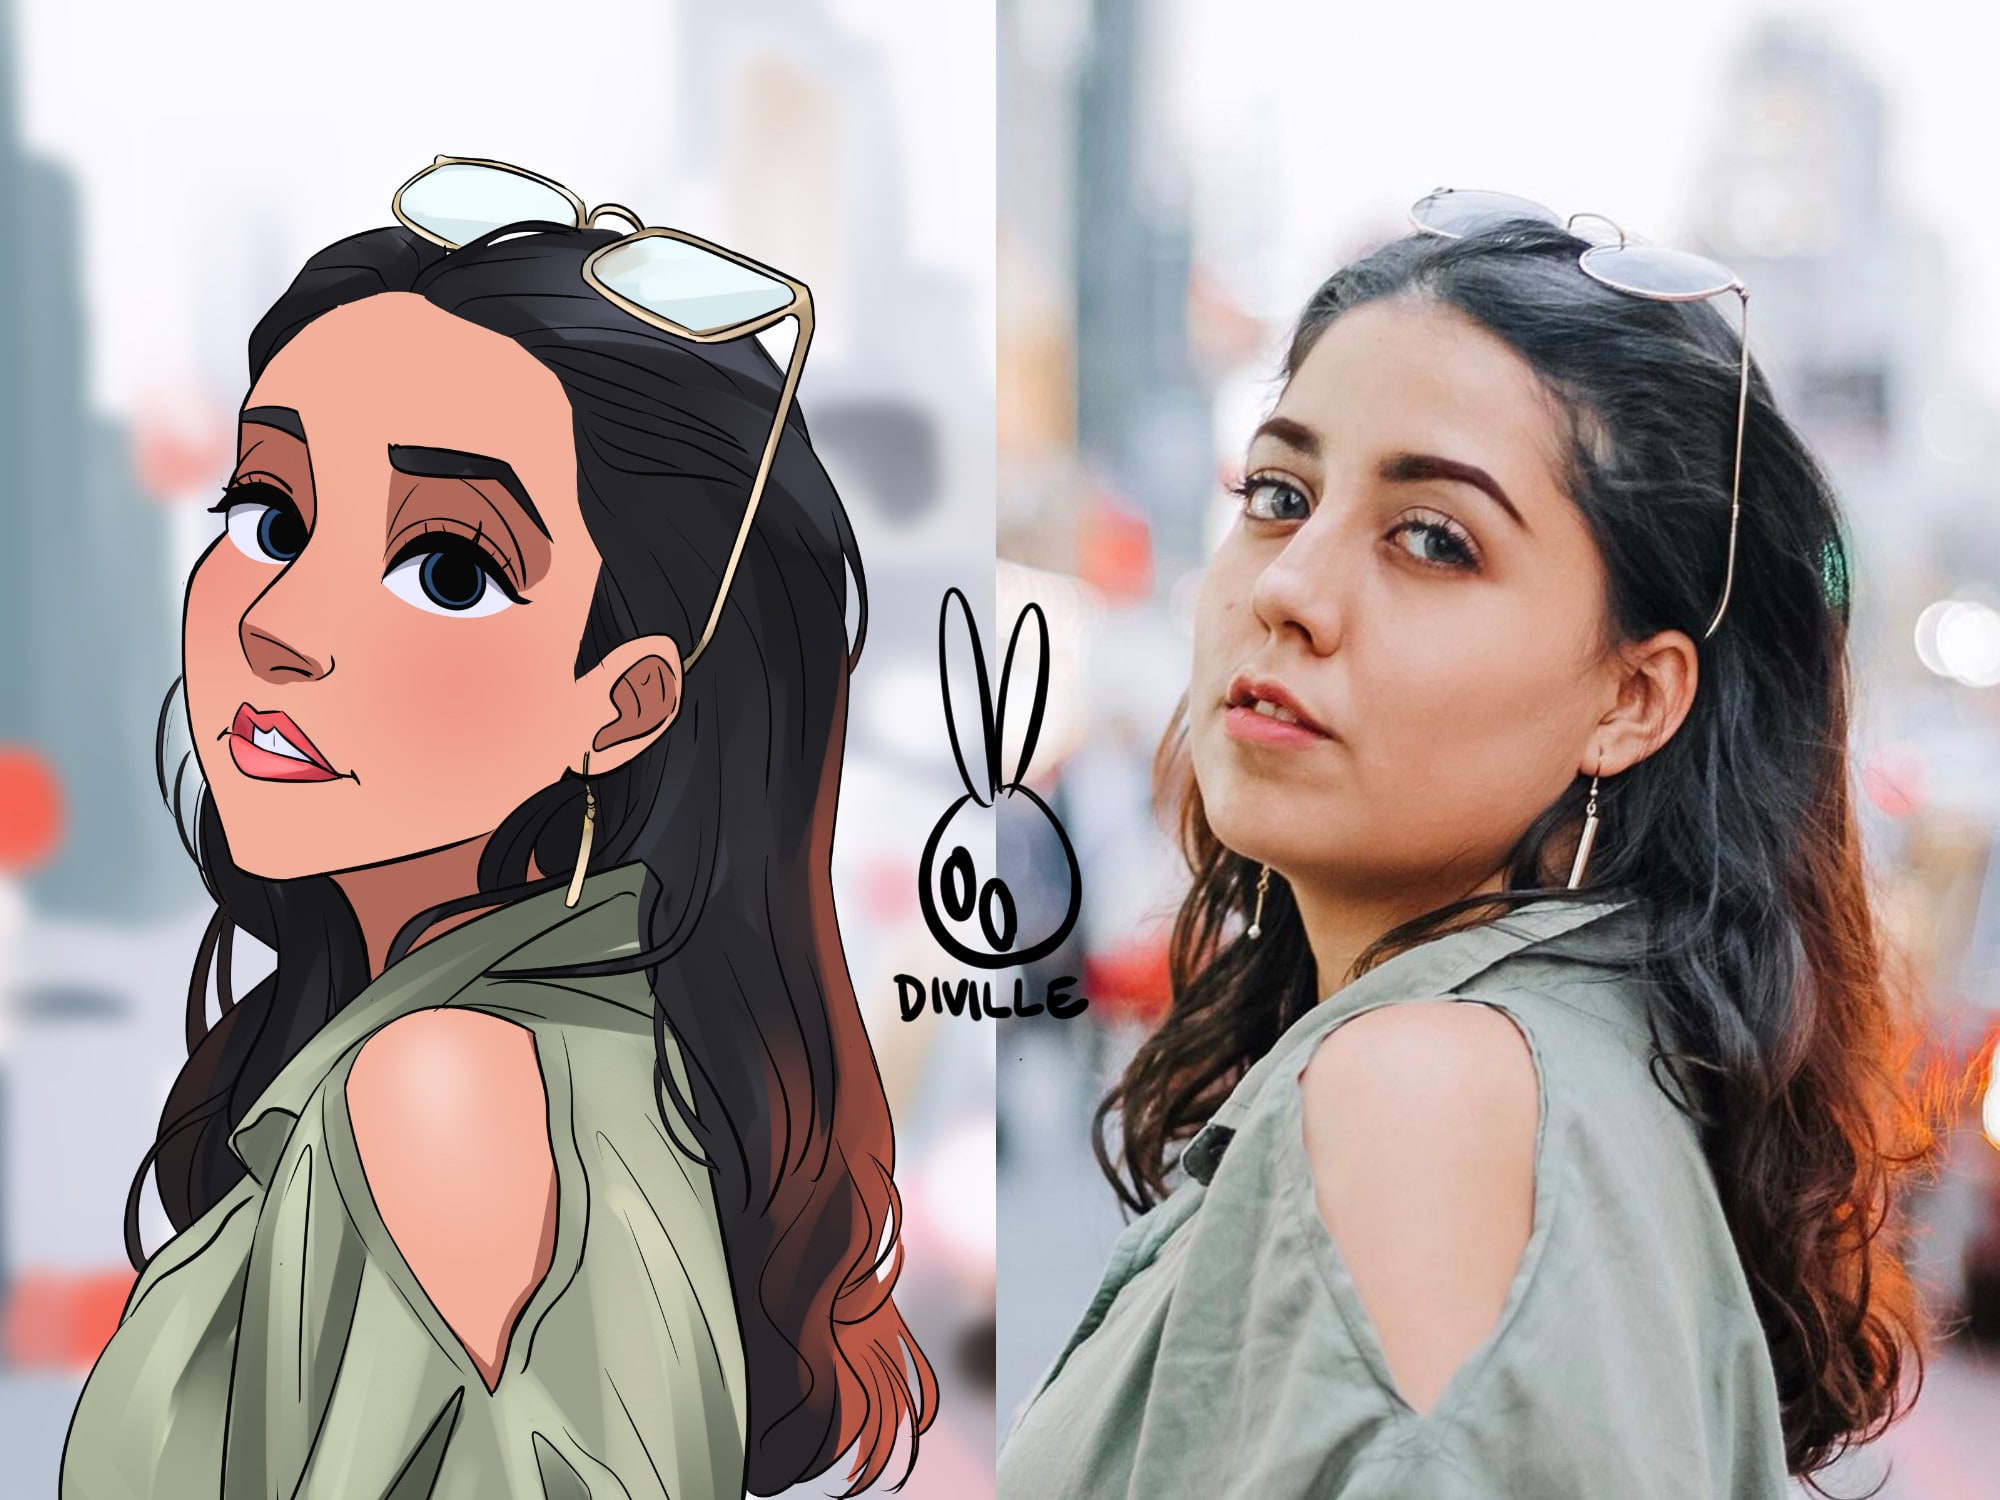 Draw a disney cartoon style drawing for your portrait by Mequile_diville |  Fiverr